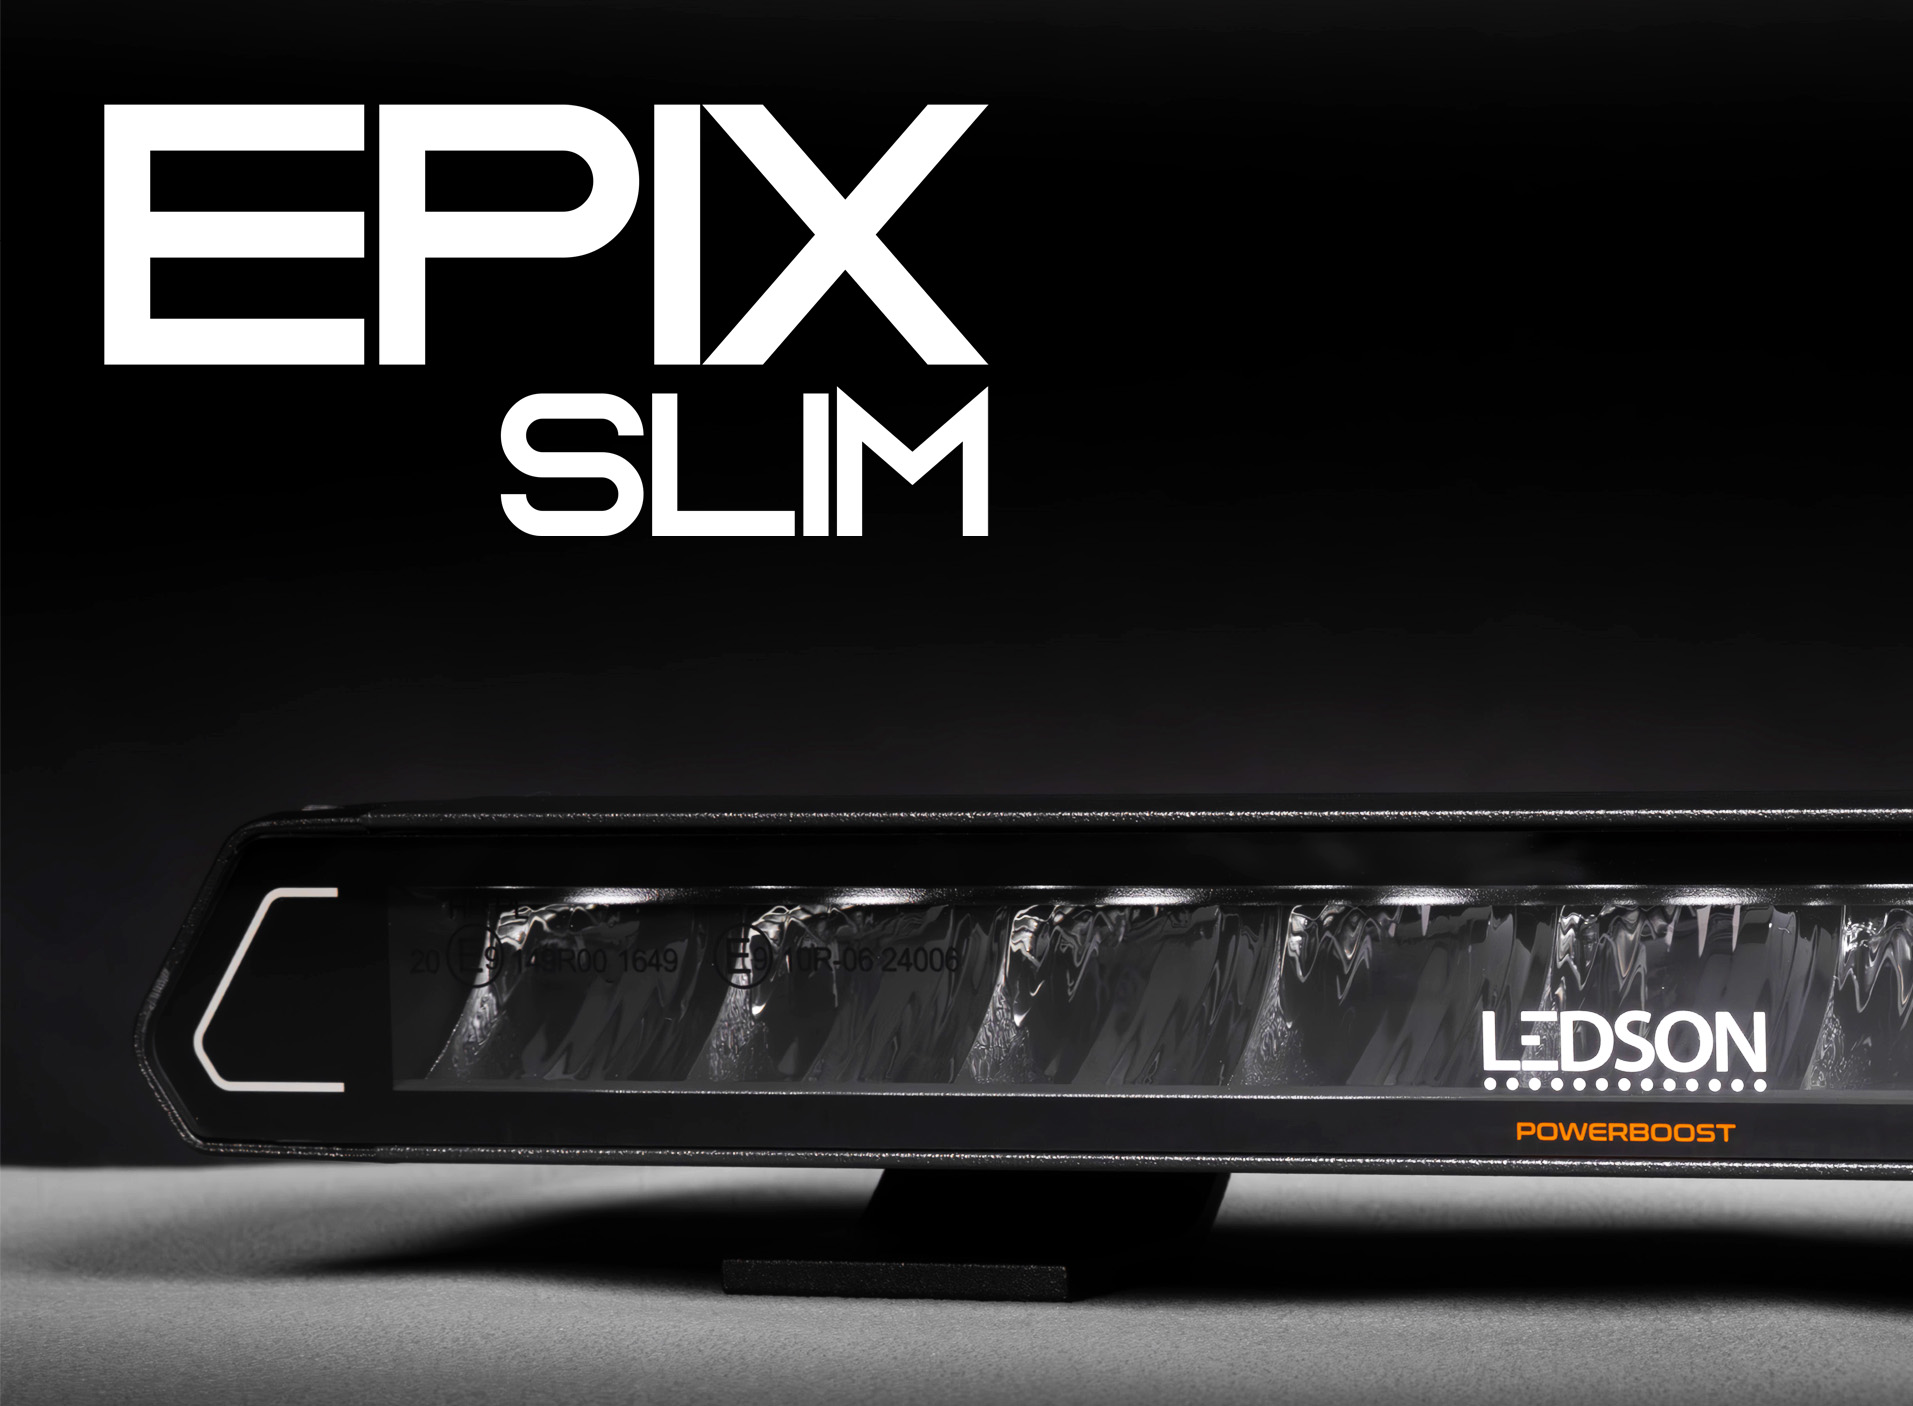 EPIX SLIM - A new generation from the Epix family